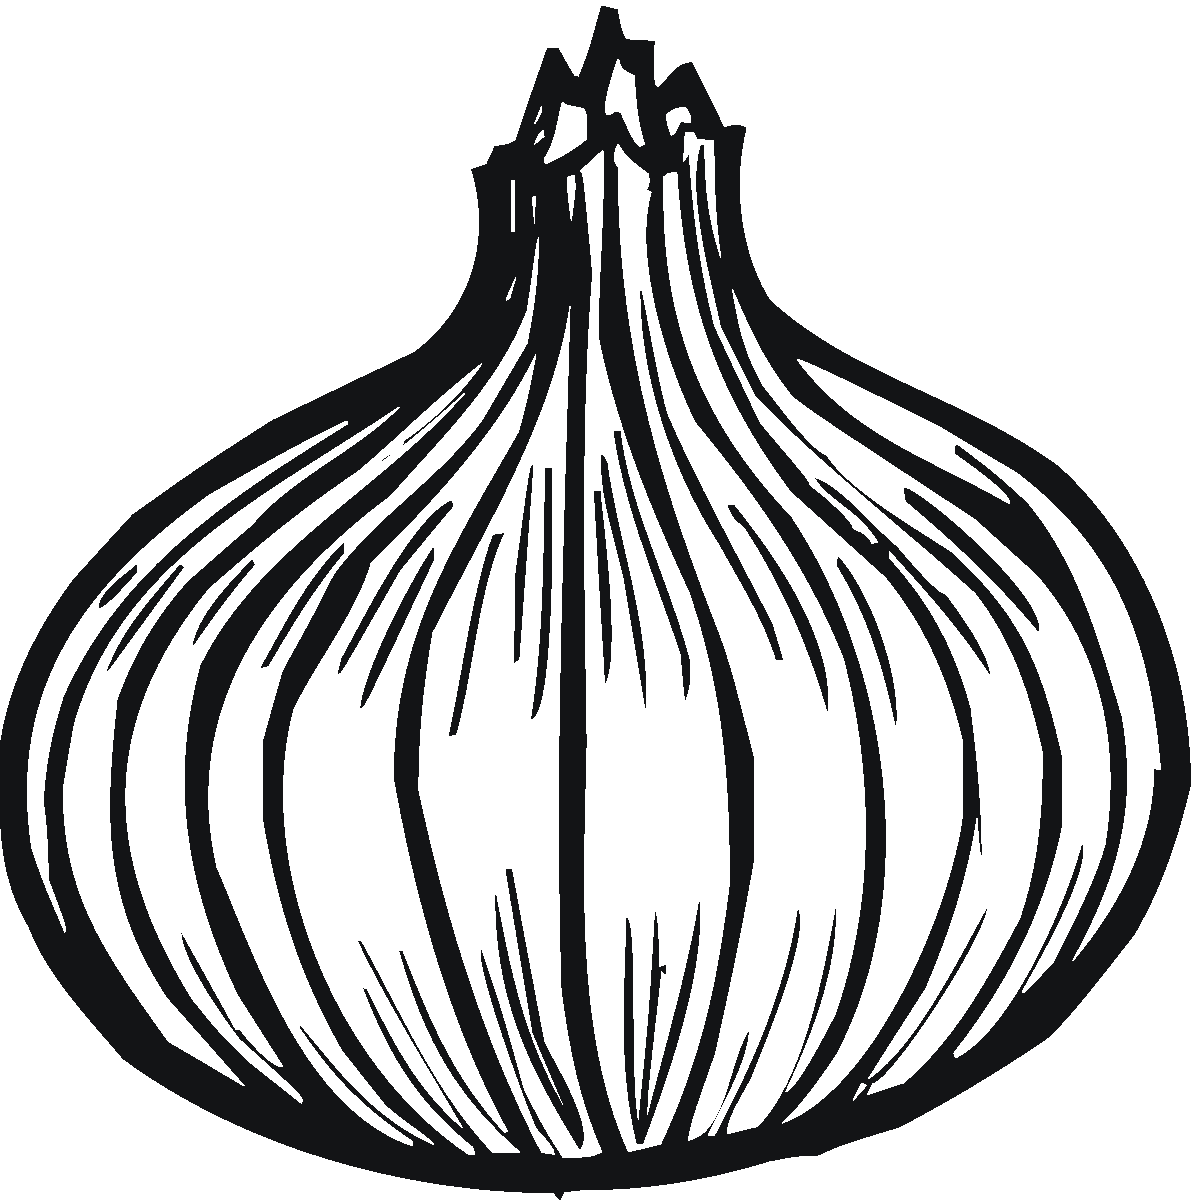 Onion Clipart Black And White | Free download on ClipArtMag